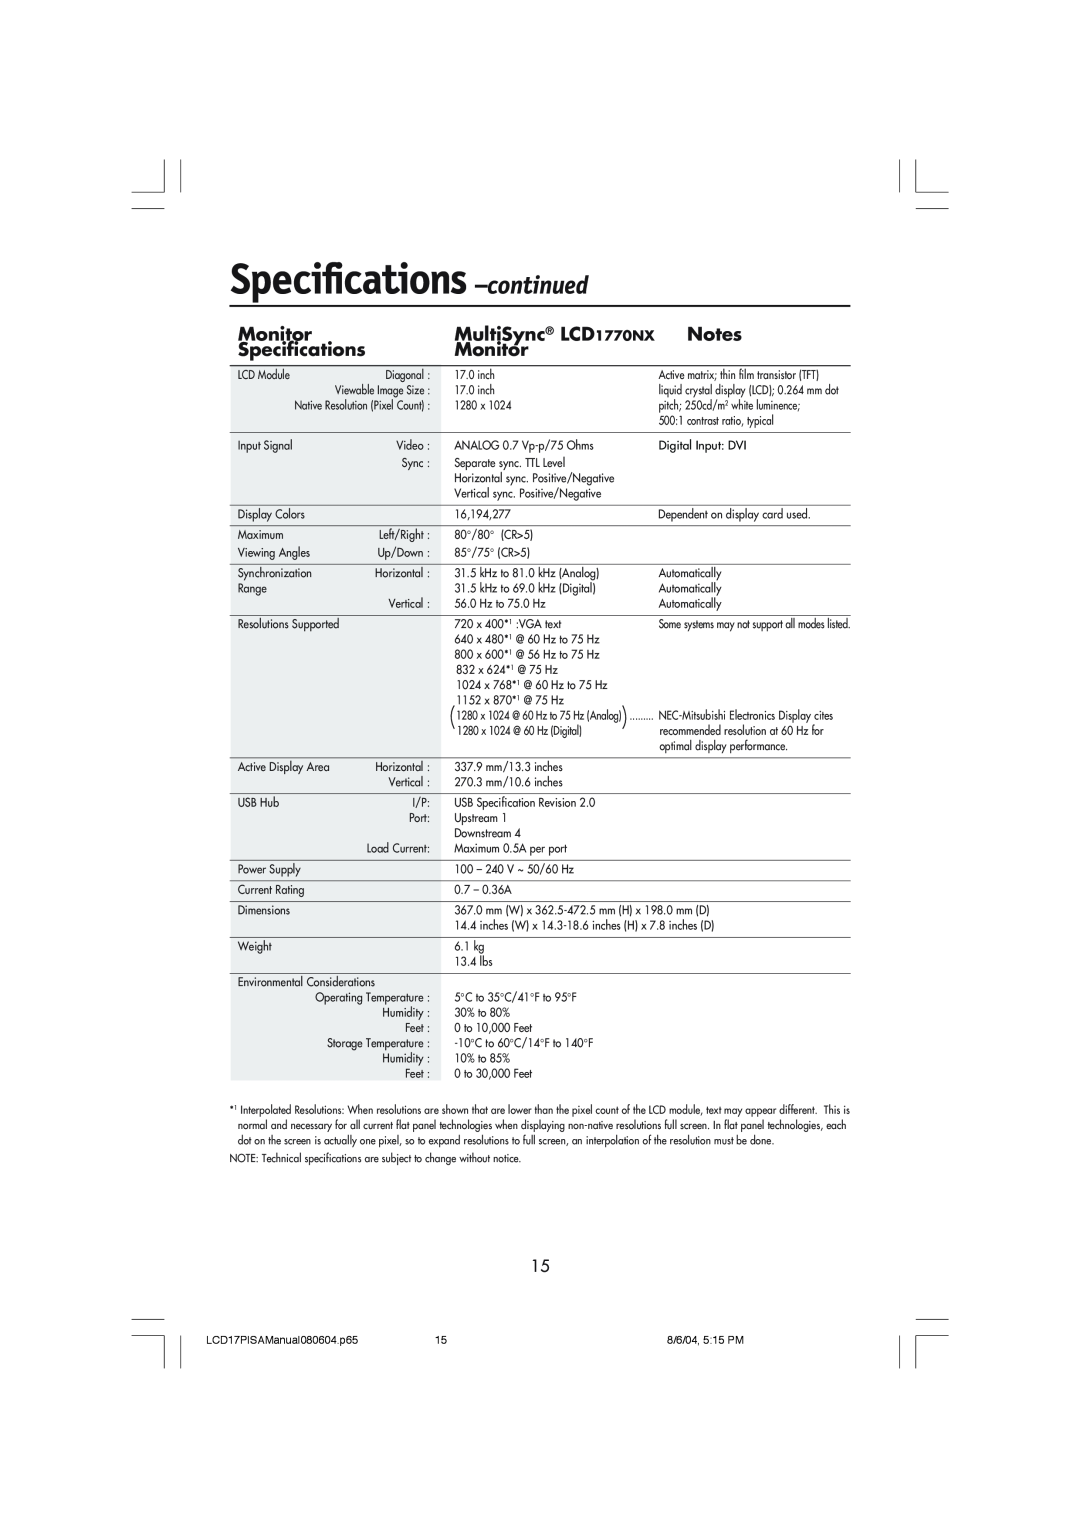 NEC LCD1770V, LCD1770NX, LCD1770NXM user manual Specifications -continued, MultiSync LCD1770NX, Monitor 